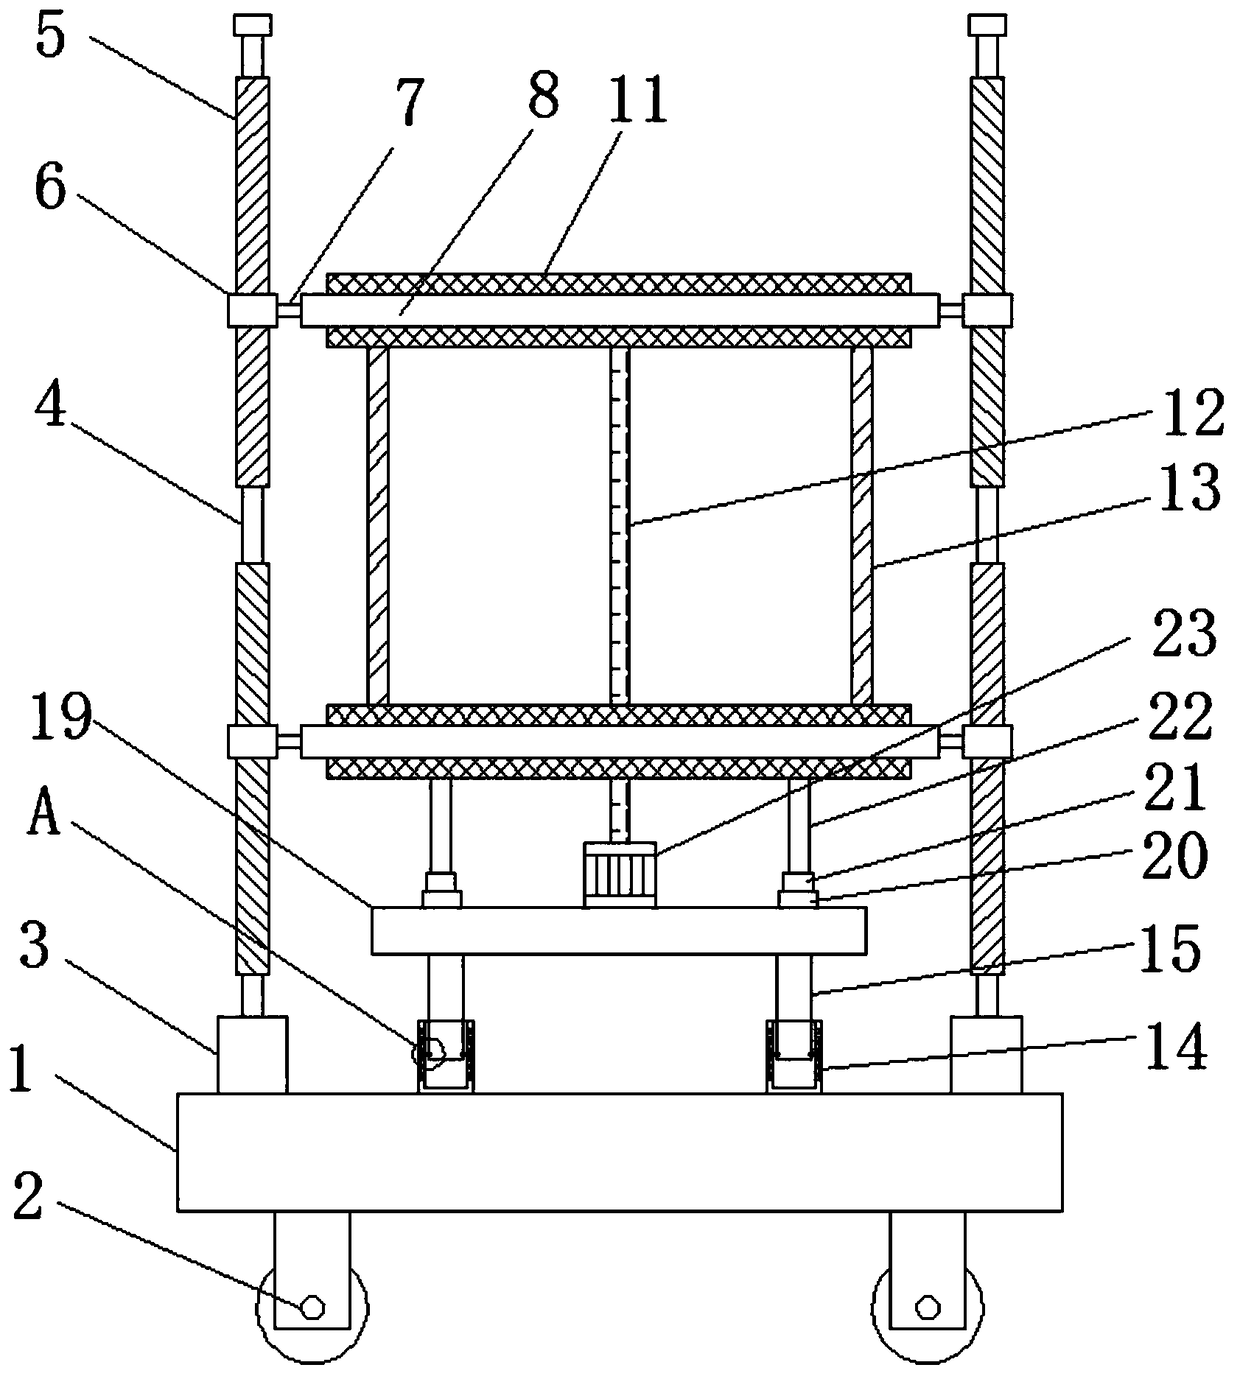 Multi-azimuth display rack for mechanical device